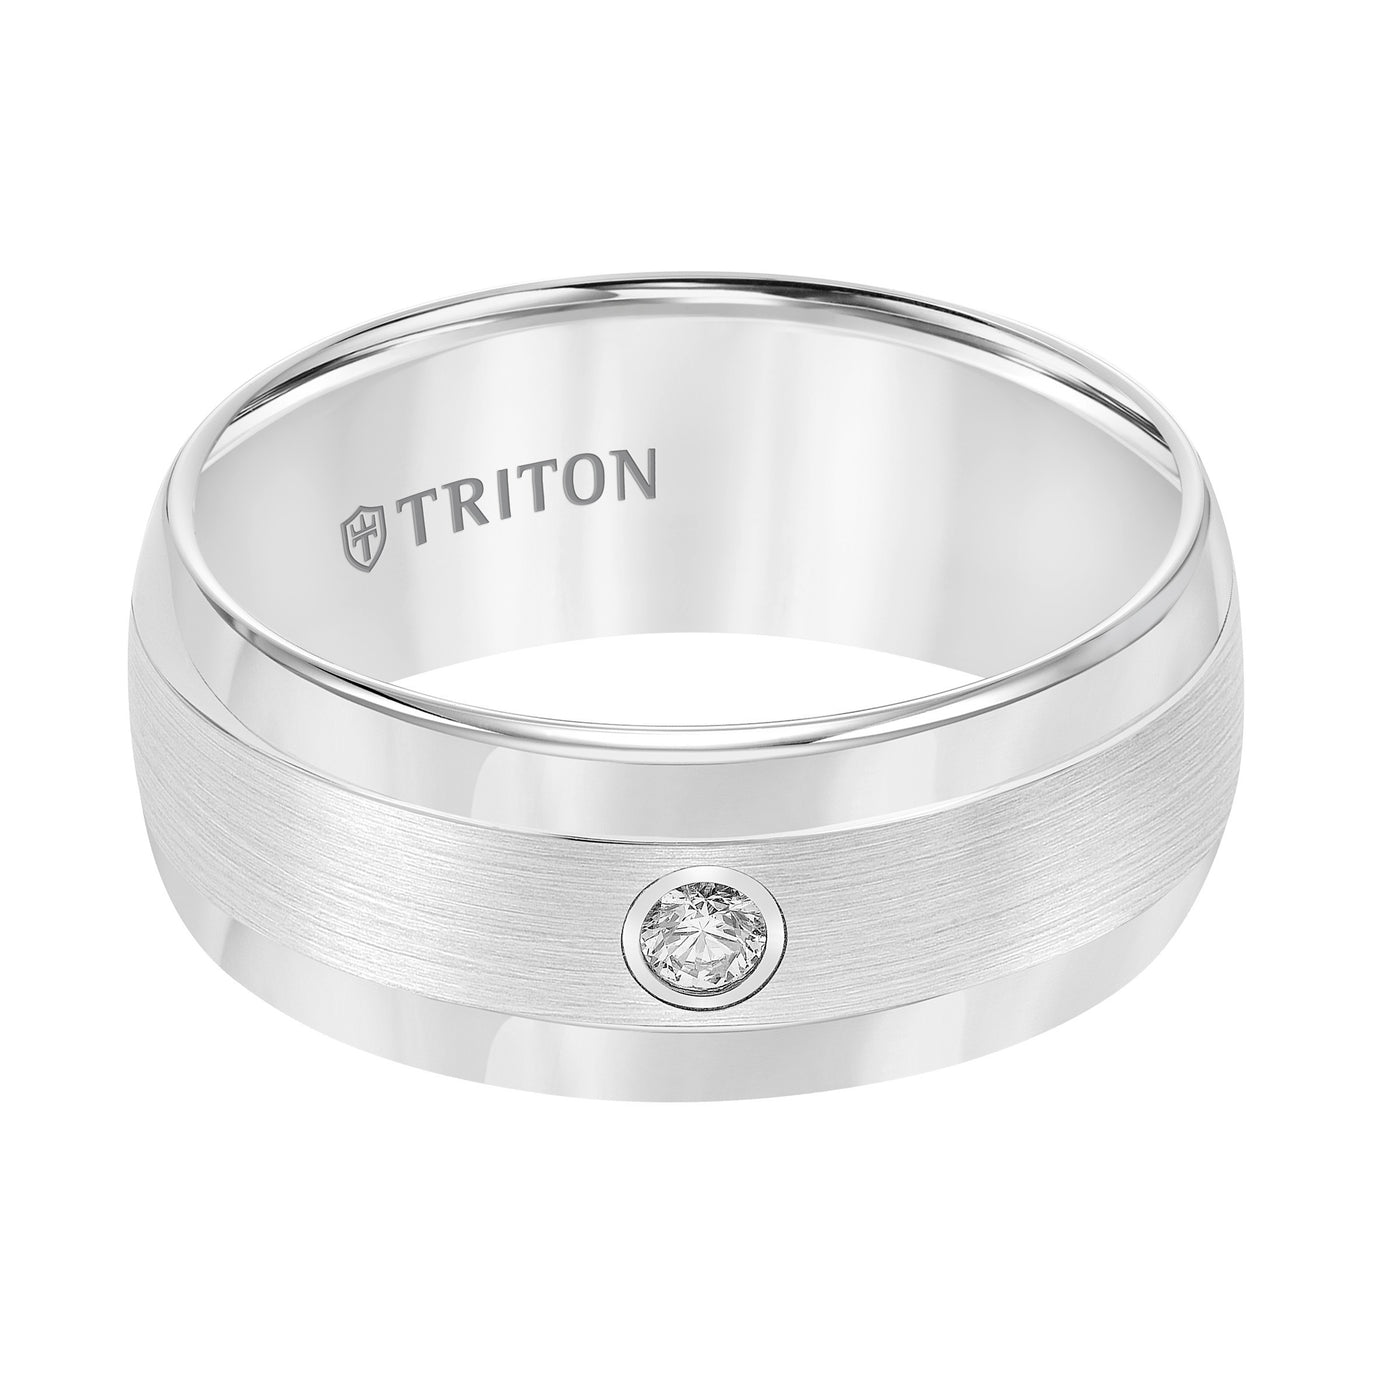 9mm White Tungsten Carbide domed Diamond comfort fit band with satin finish center and bright polish edges